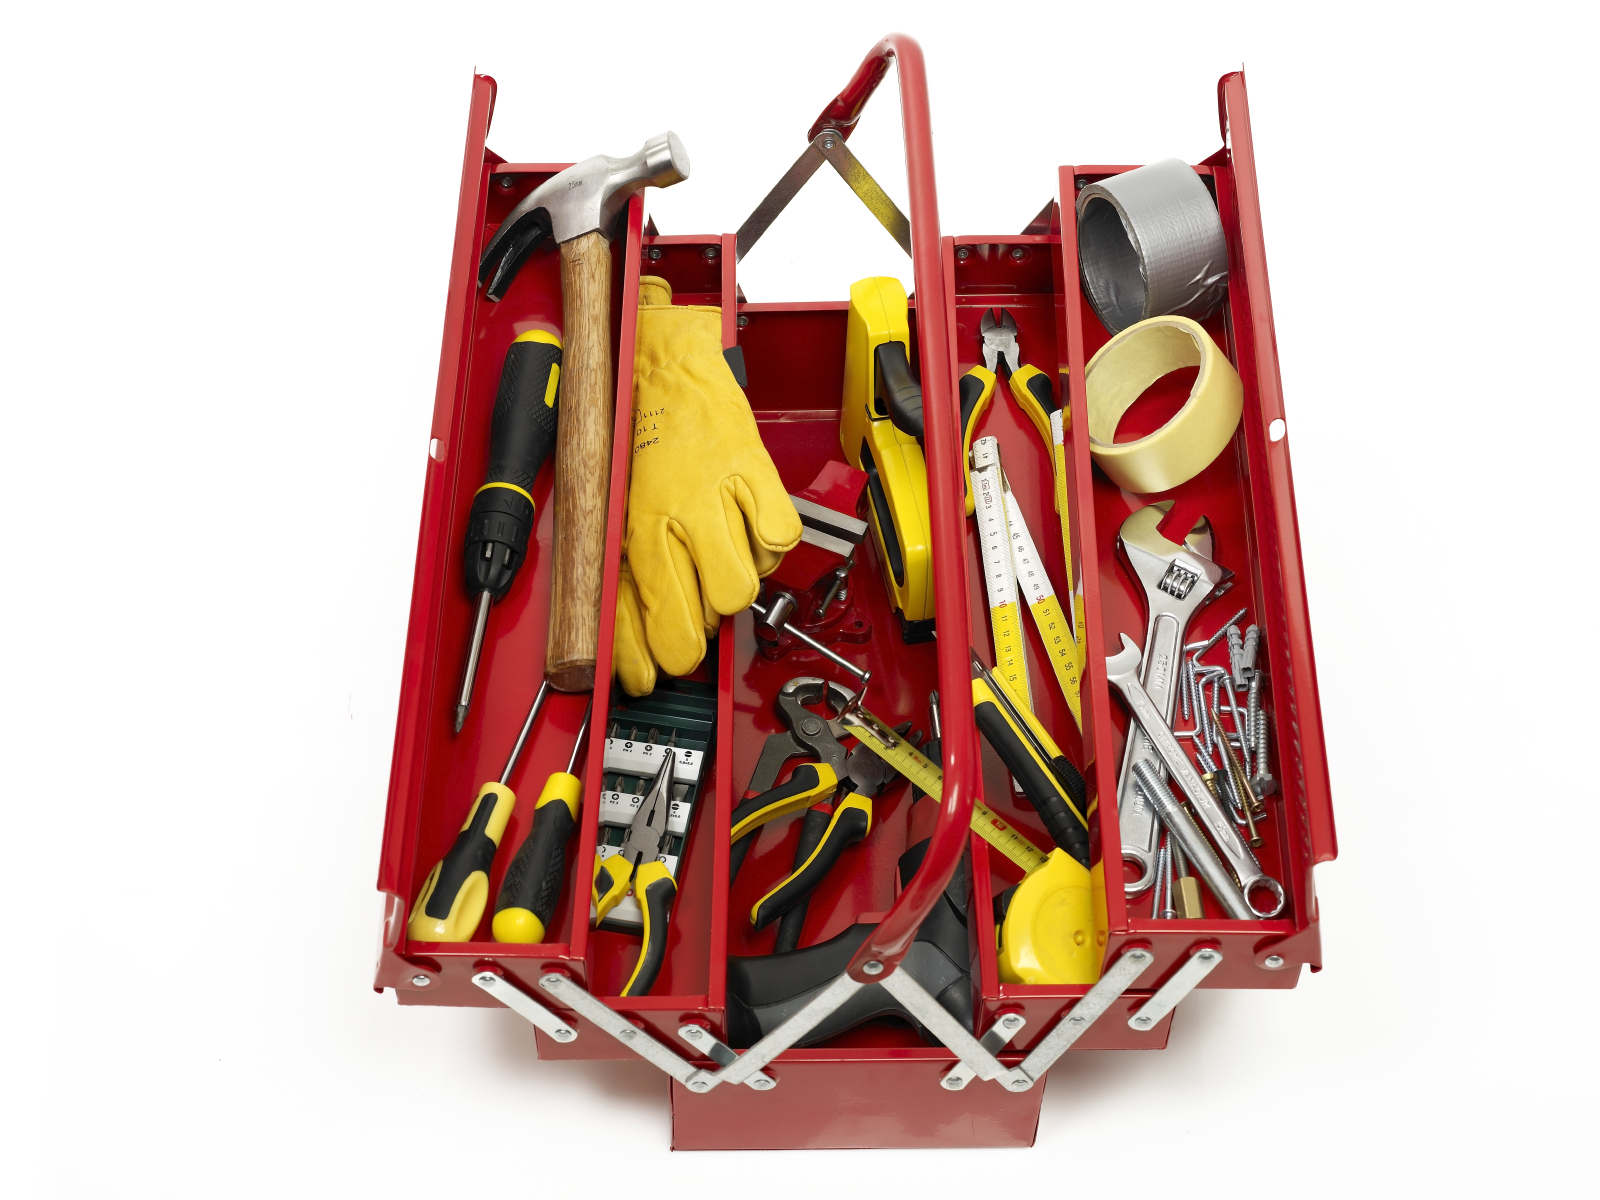 Regular Toolbox Talks Can Help Build A Safety Culture